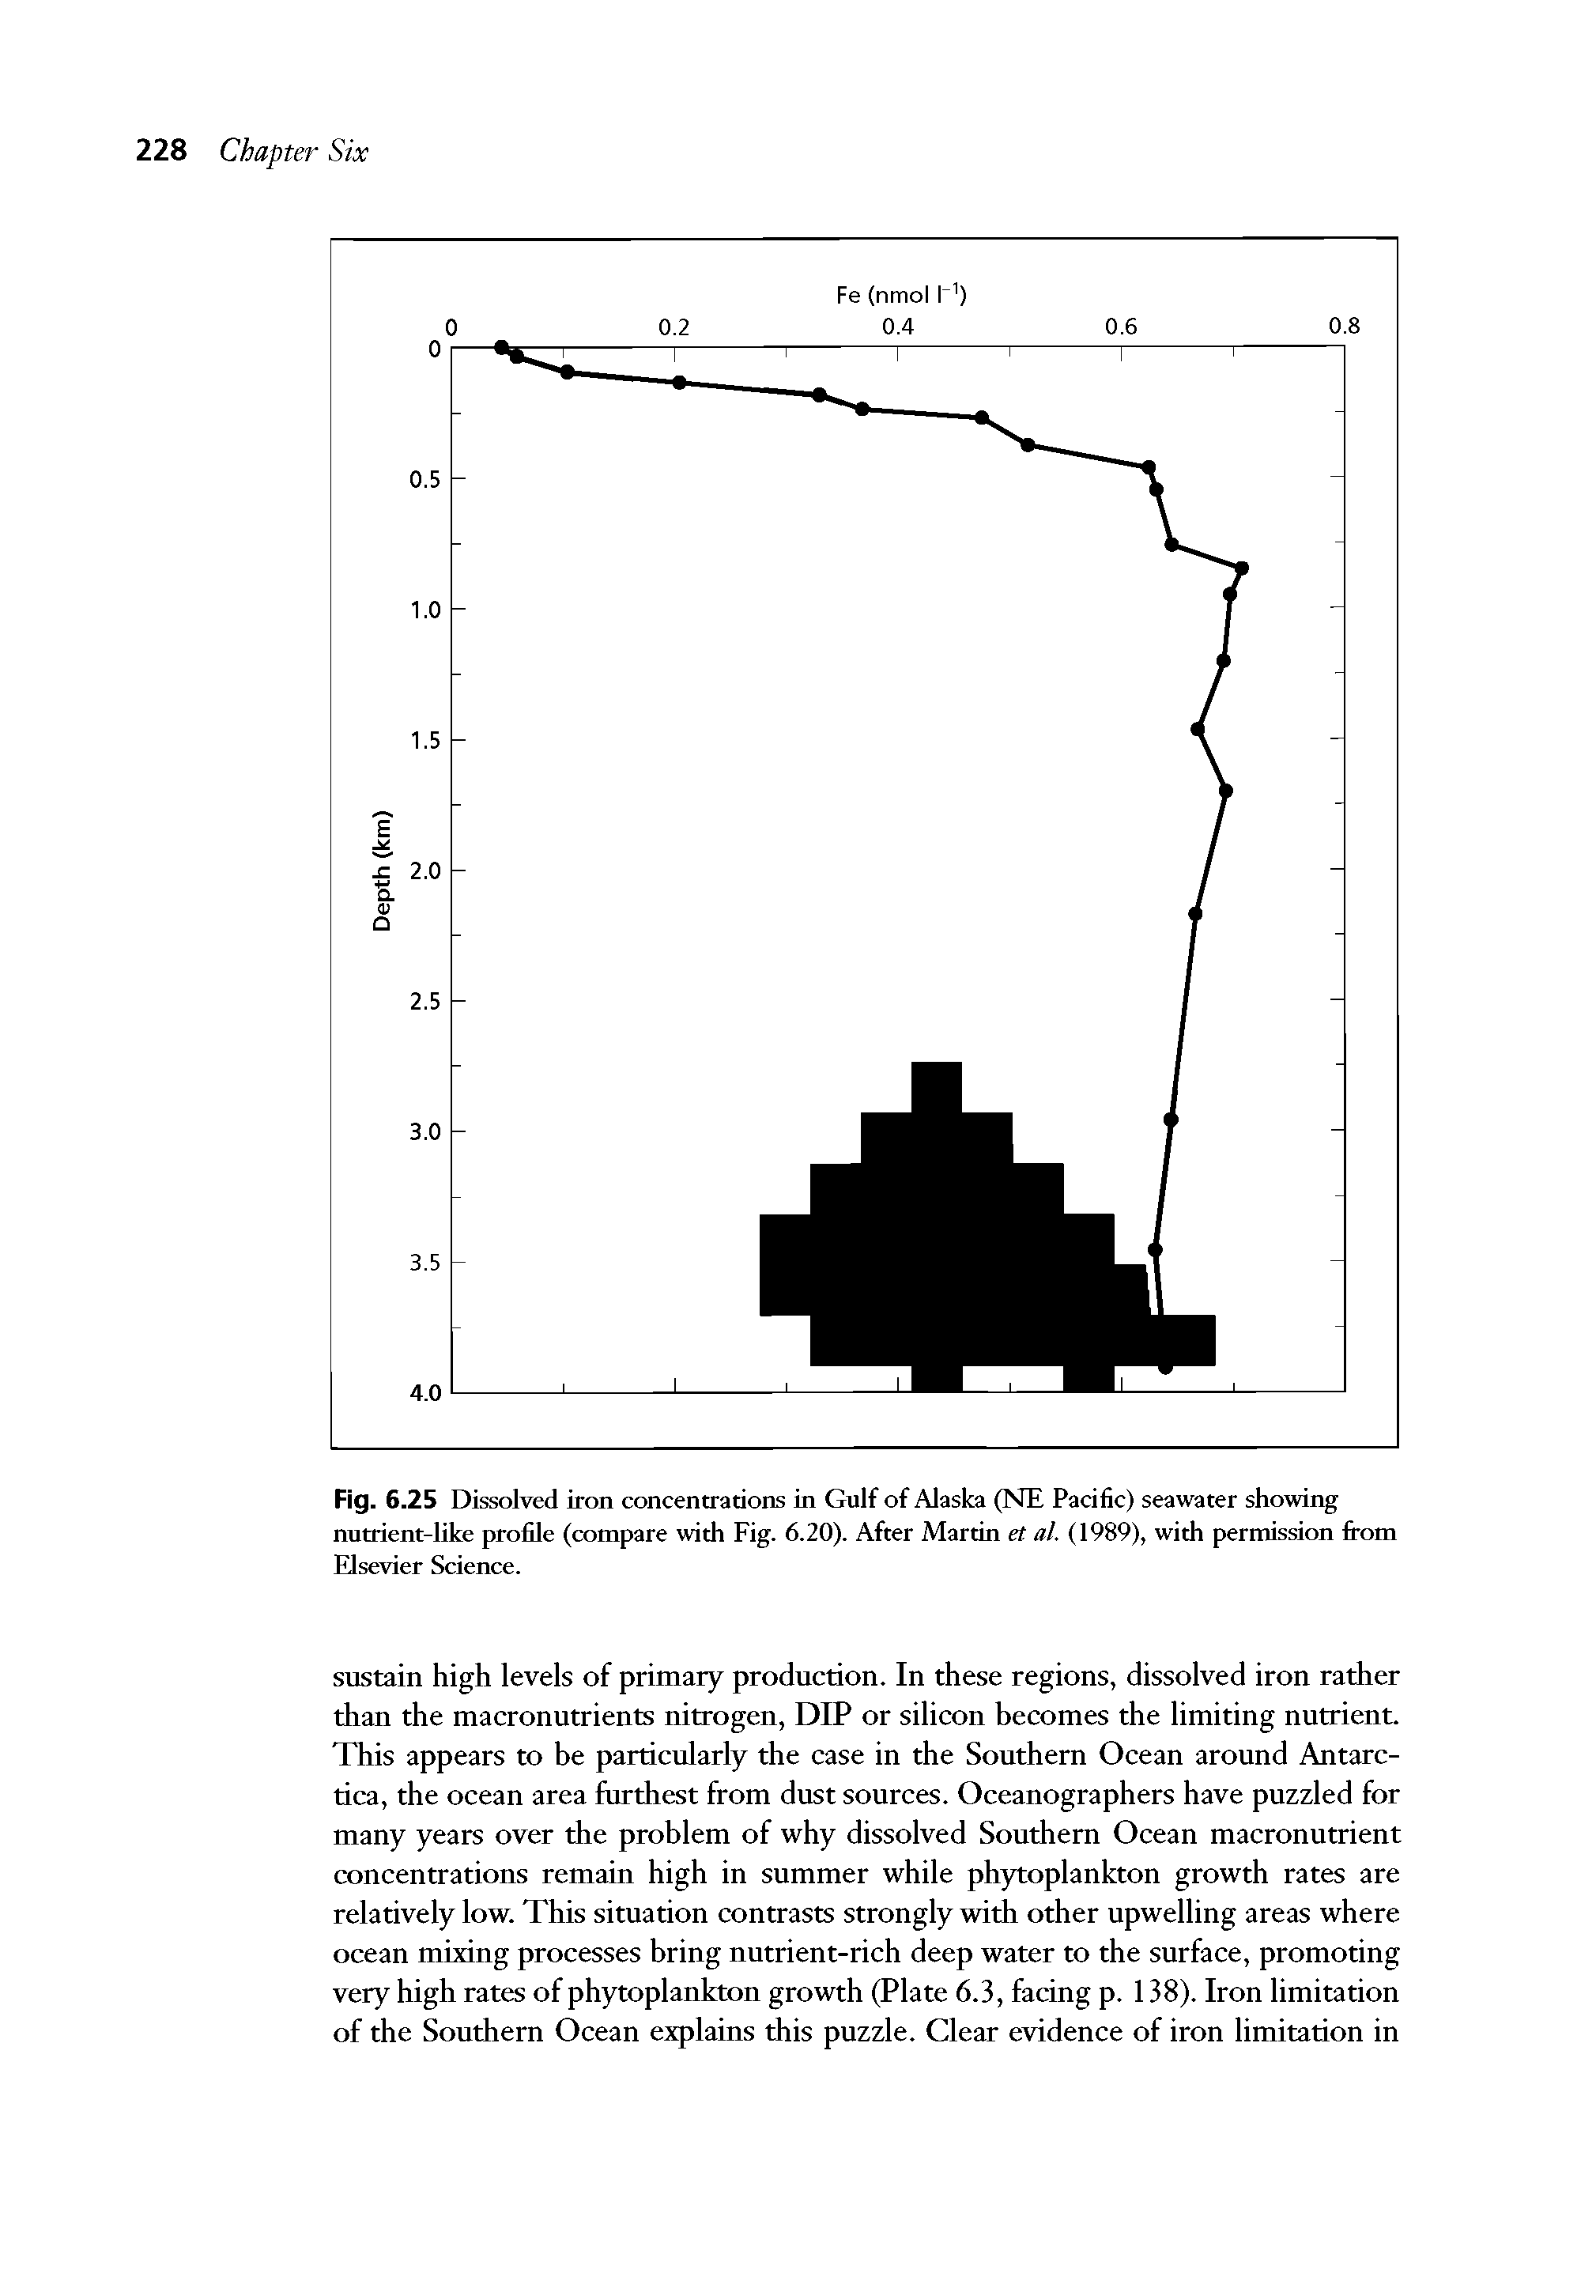 Fig. 6.25 Dissolved iron concentrations in Gulf of Alaska (NE Pacific) seawater showing nutrient-like profile (compare with Fig. 6.20). After Martin et al. (1989), with permission from Elsevier Science.